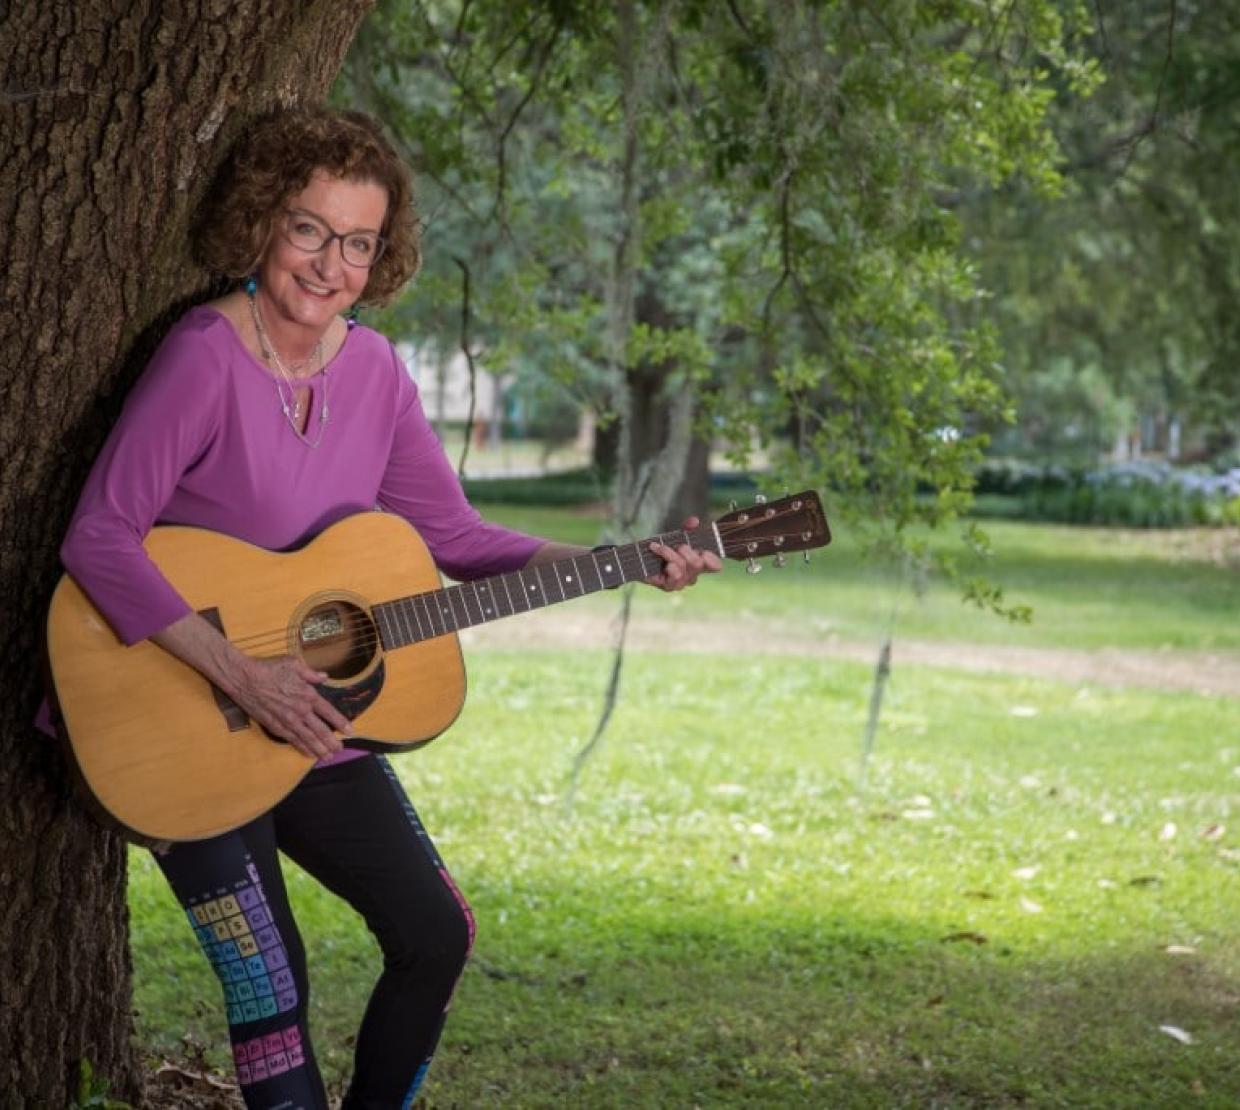 A woman in a purple shirt leaning against a tree and holding a guitar